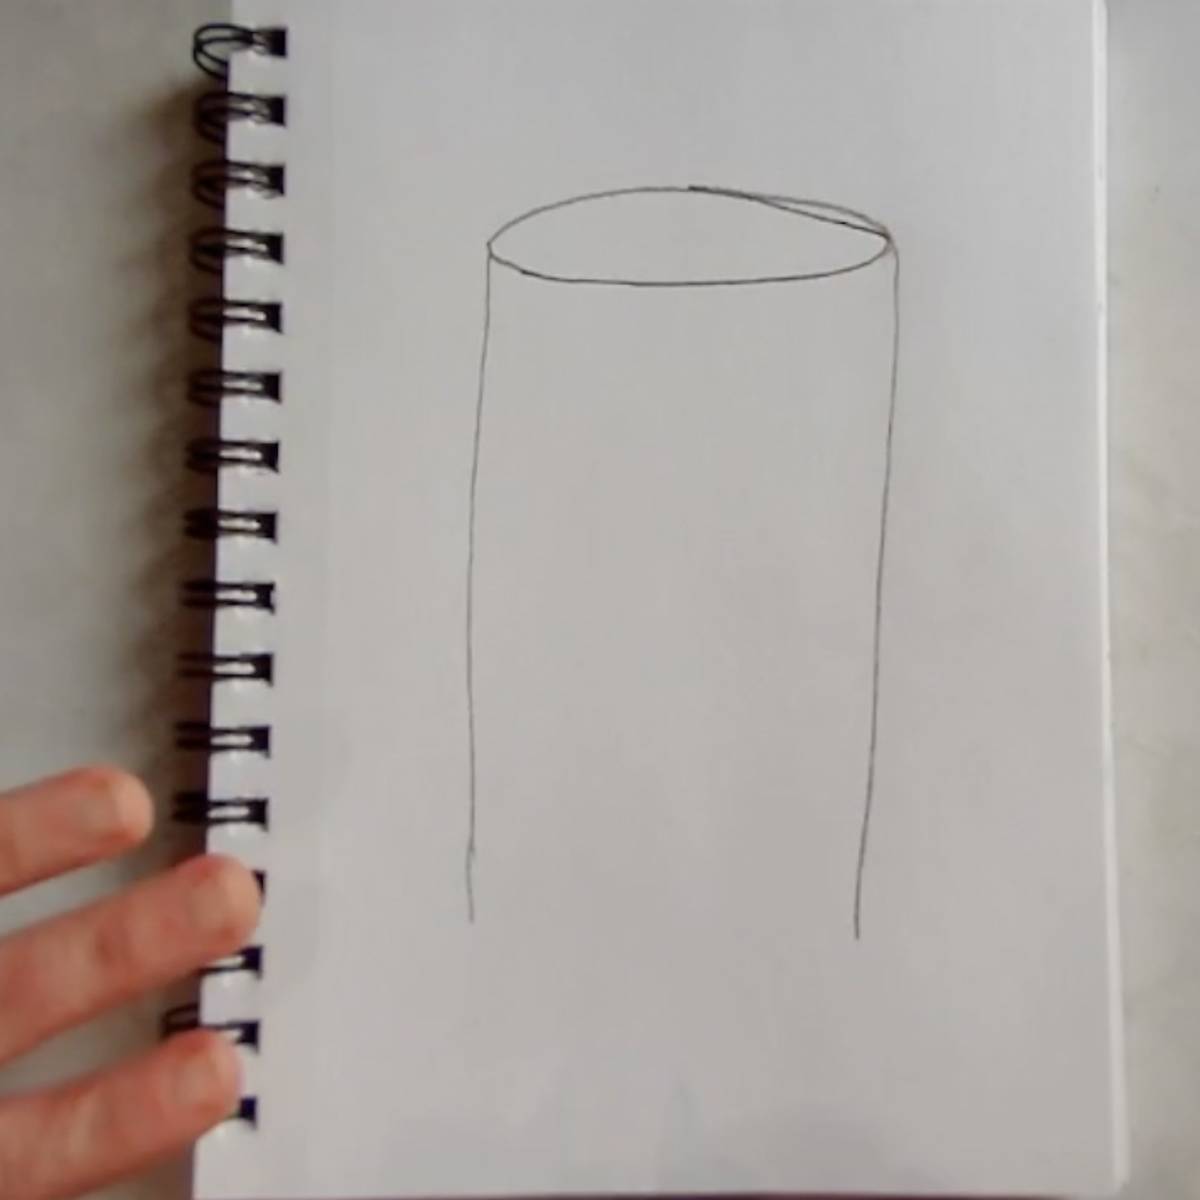 Draw in the sides of cylinder